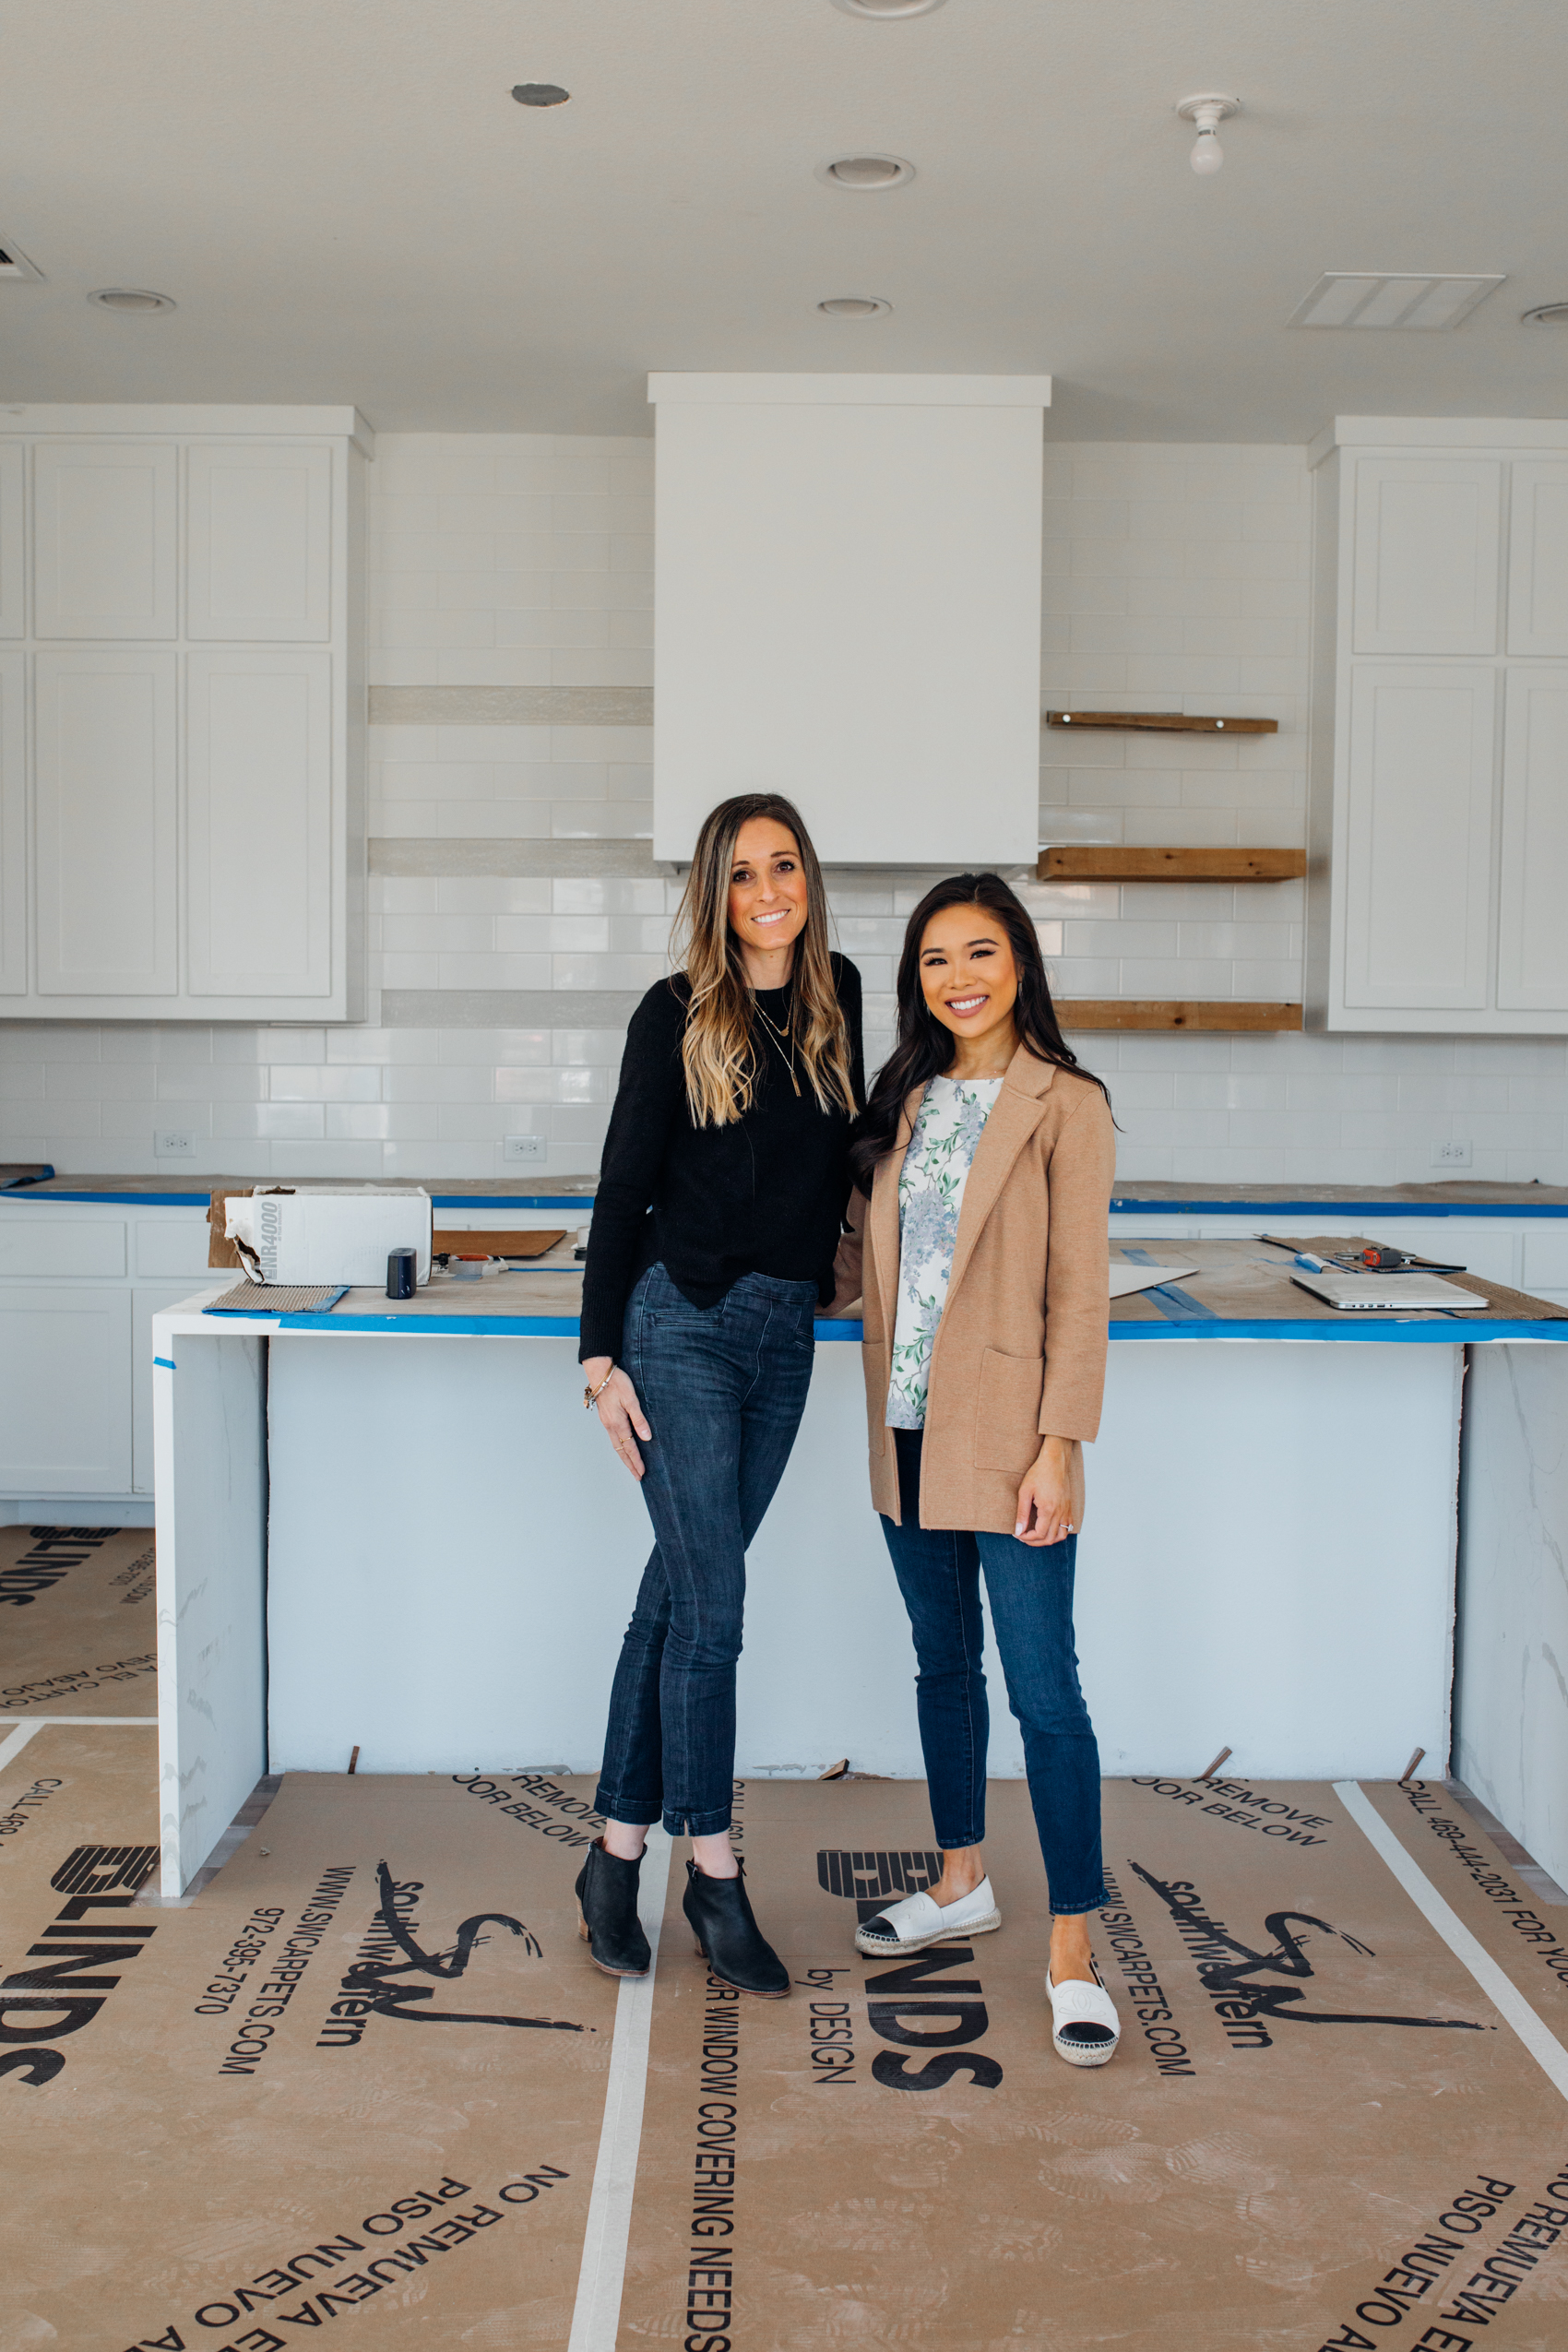 Dallas interior designer Toni Elmer of House Sprucing and blogger Hoang-Kim insider her white kitchen with quartz waterfall island, open shelves, white cabinets, custom range hood in her one-story Dallas new build home